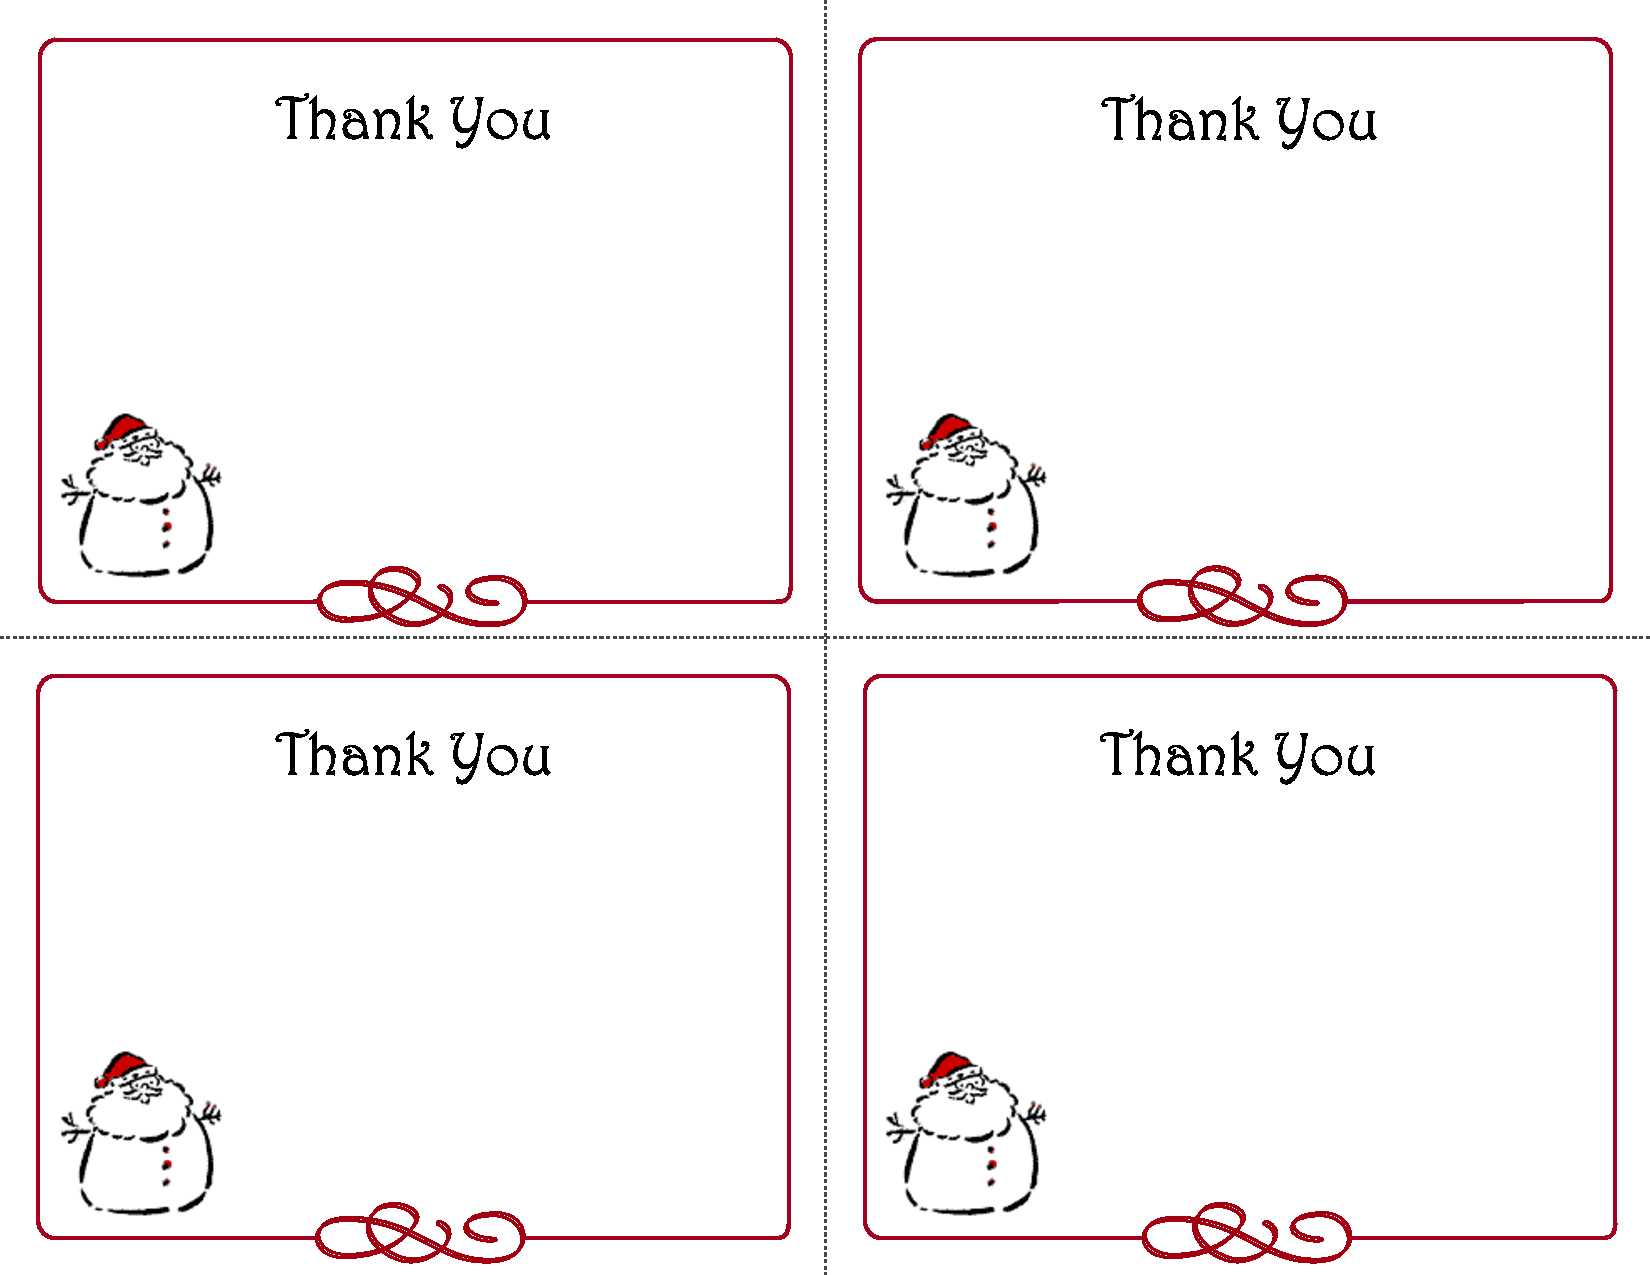 18 Visiting Christmas Card Note Template For Free Throughout Christmas Note Card Templates